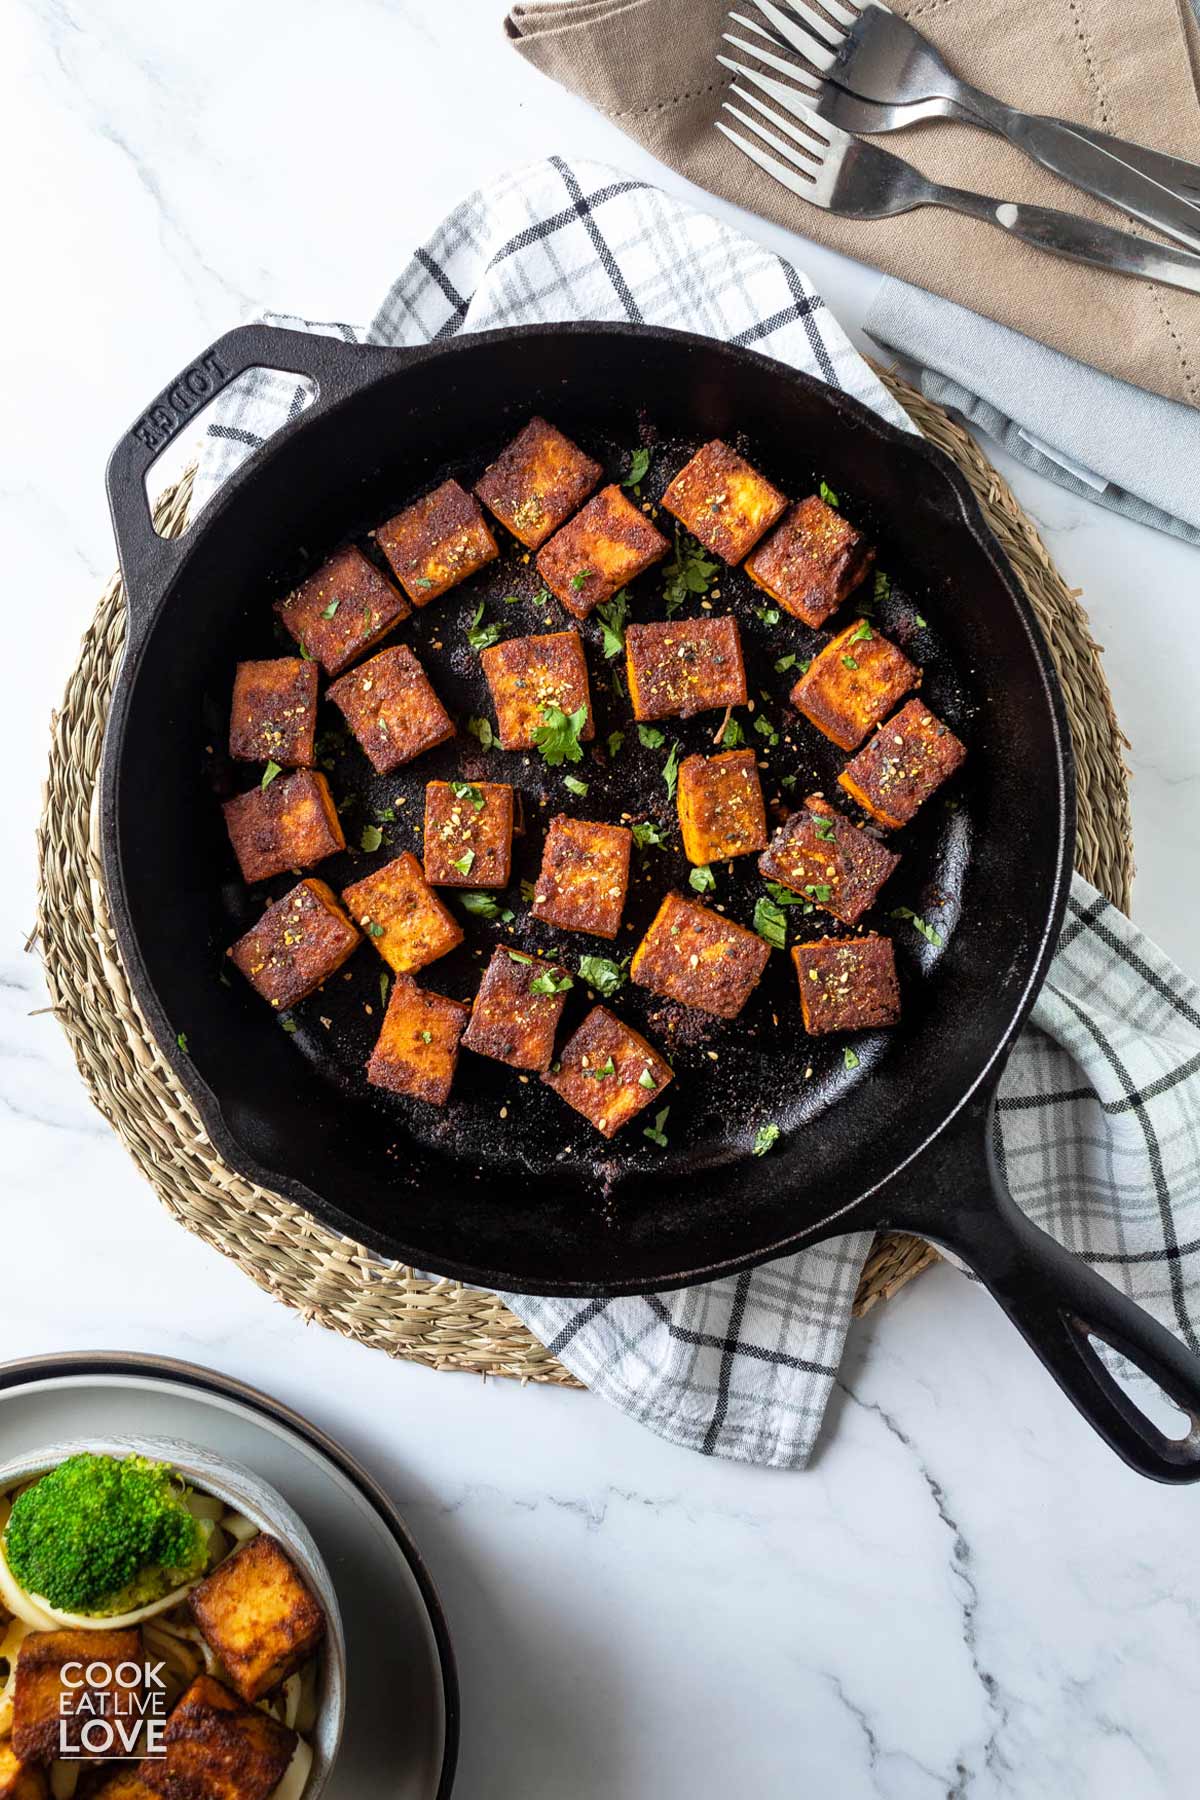 Cooked smoked tofu in a cast iron skillet.